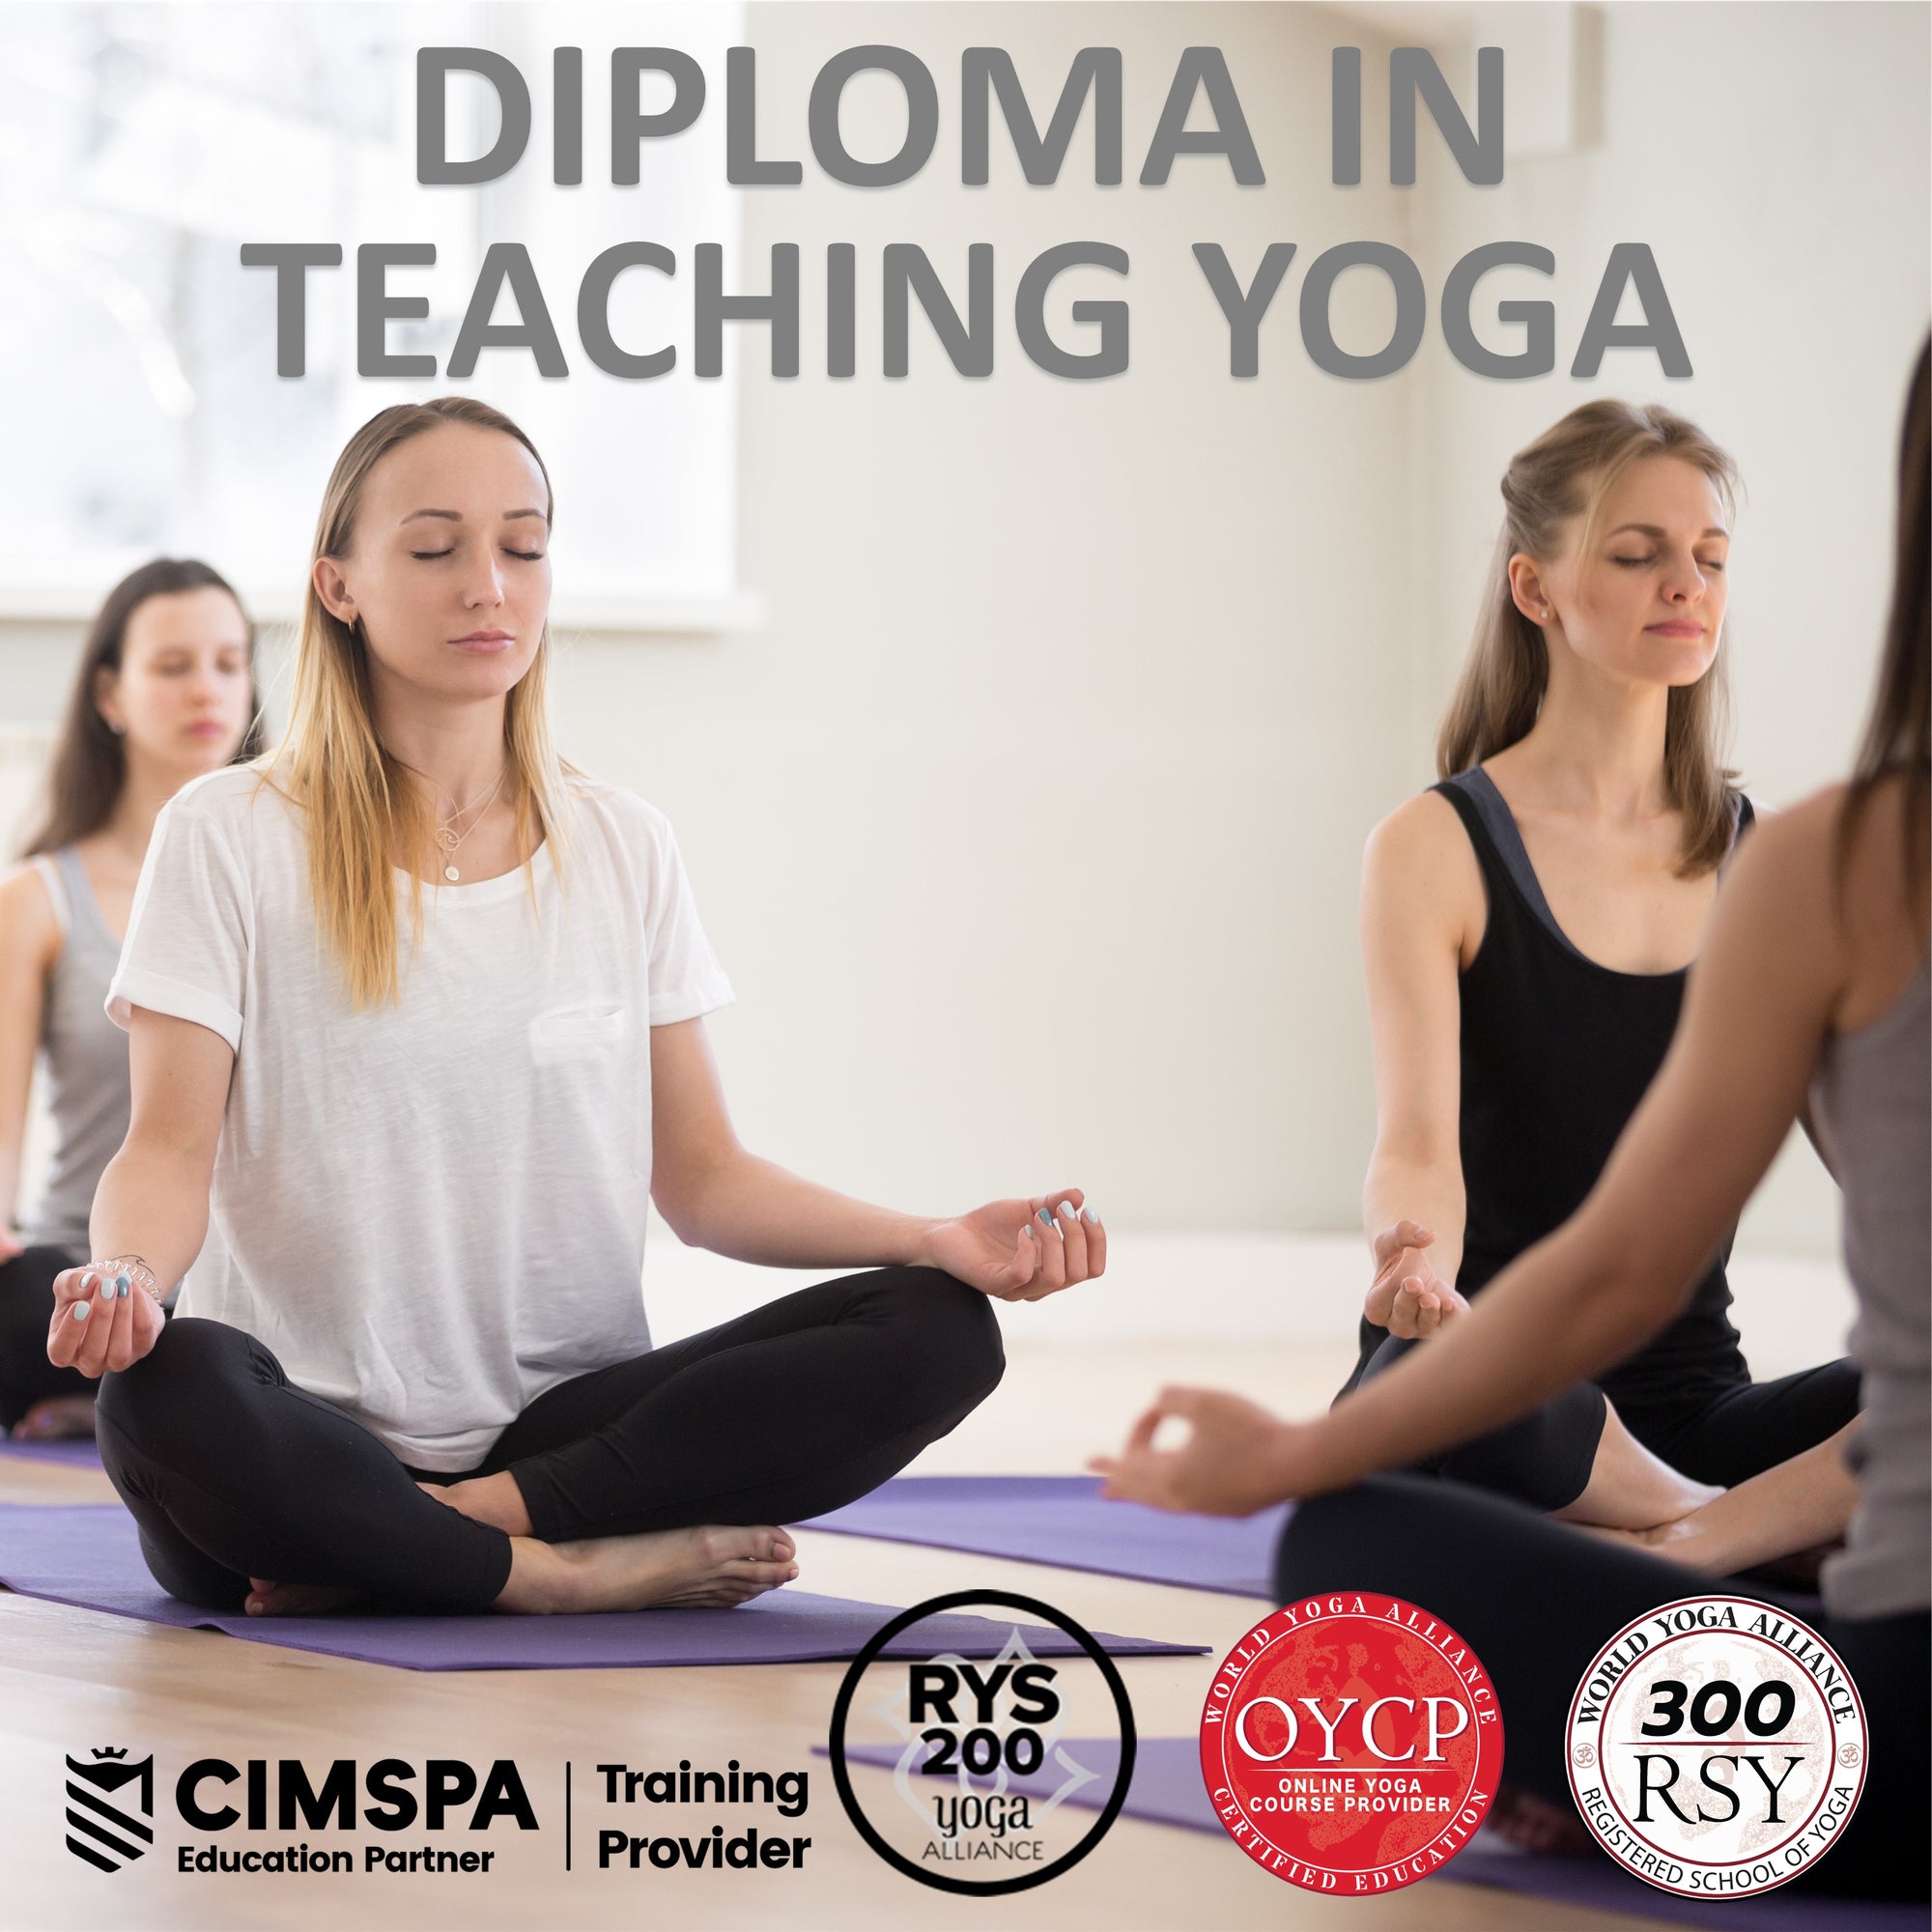 Diploma in Teaching Yoga Product Image